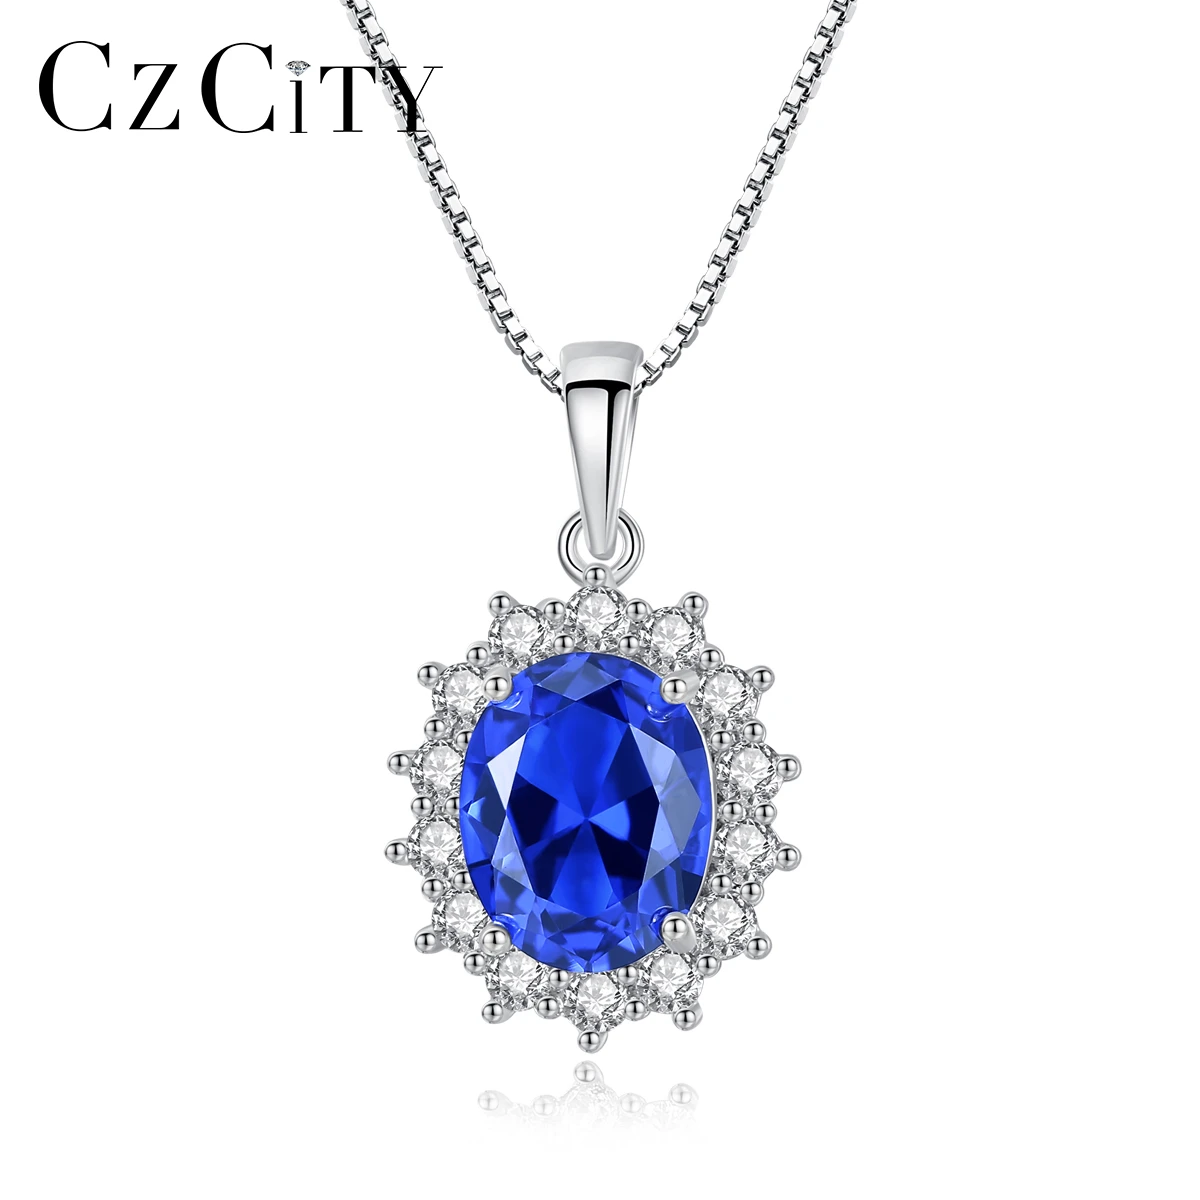 CZCITY Elegant Oval Princess Diana William Sapphire Pendant Necklace for Women 100% 925 Sterling Silver Charms Necklace Jewelry